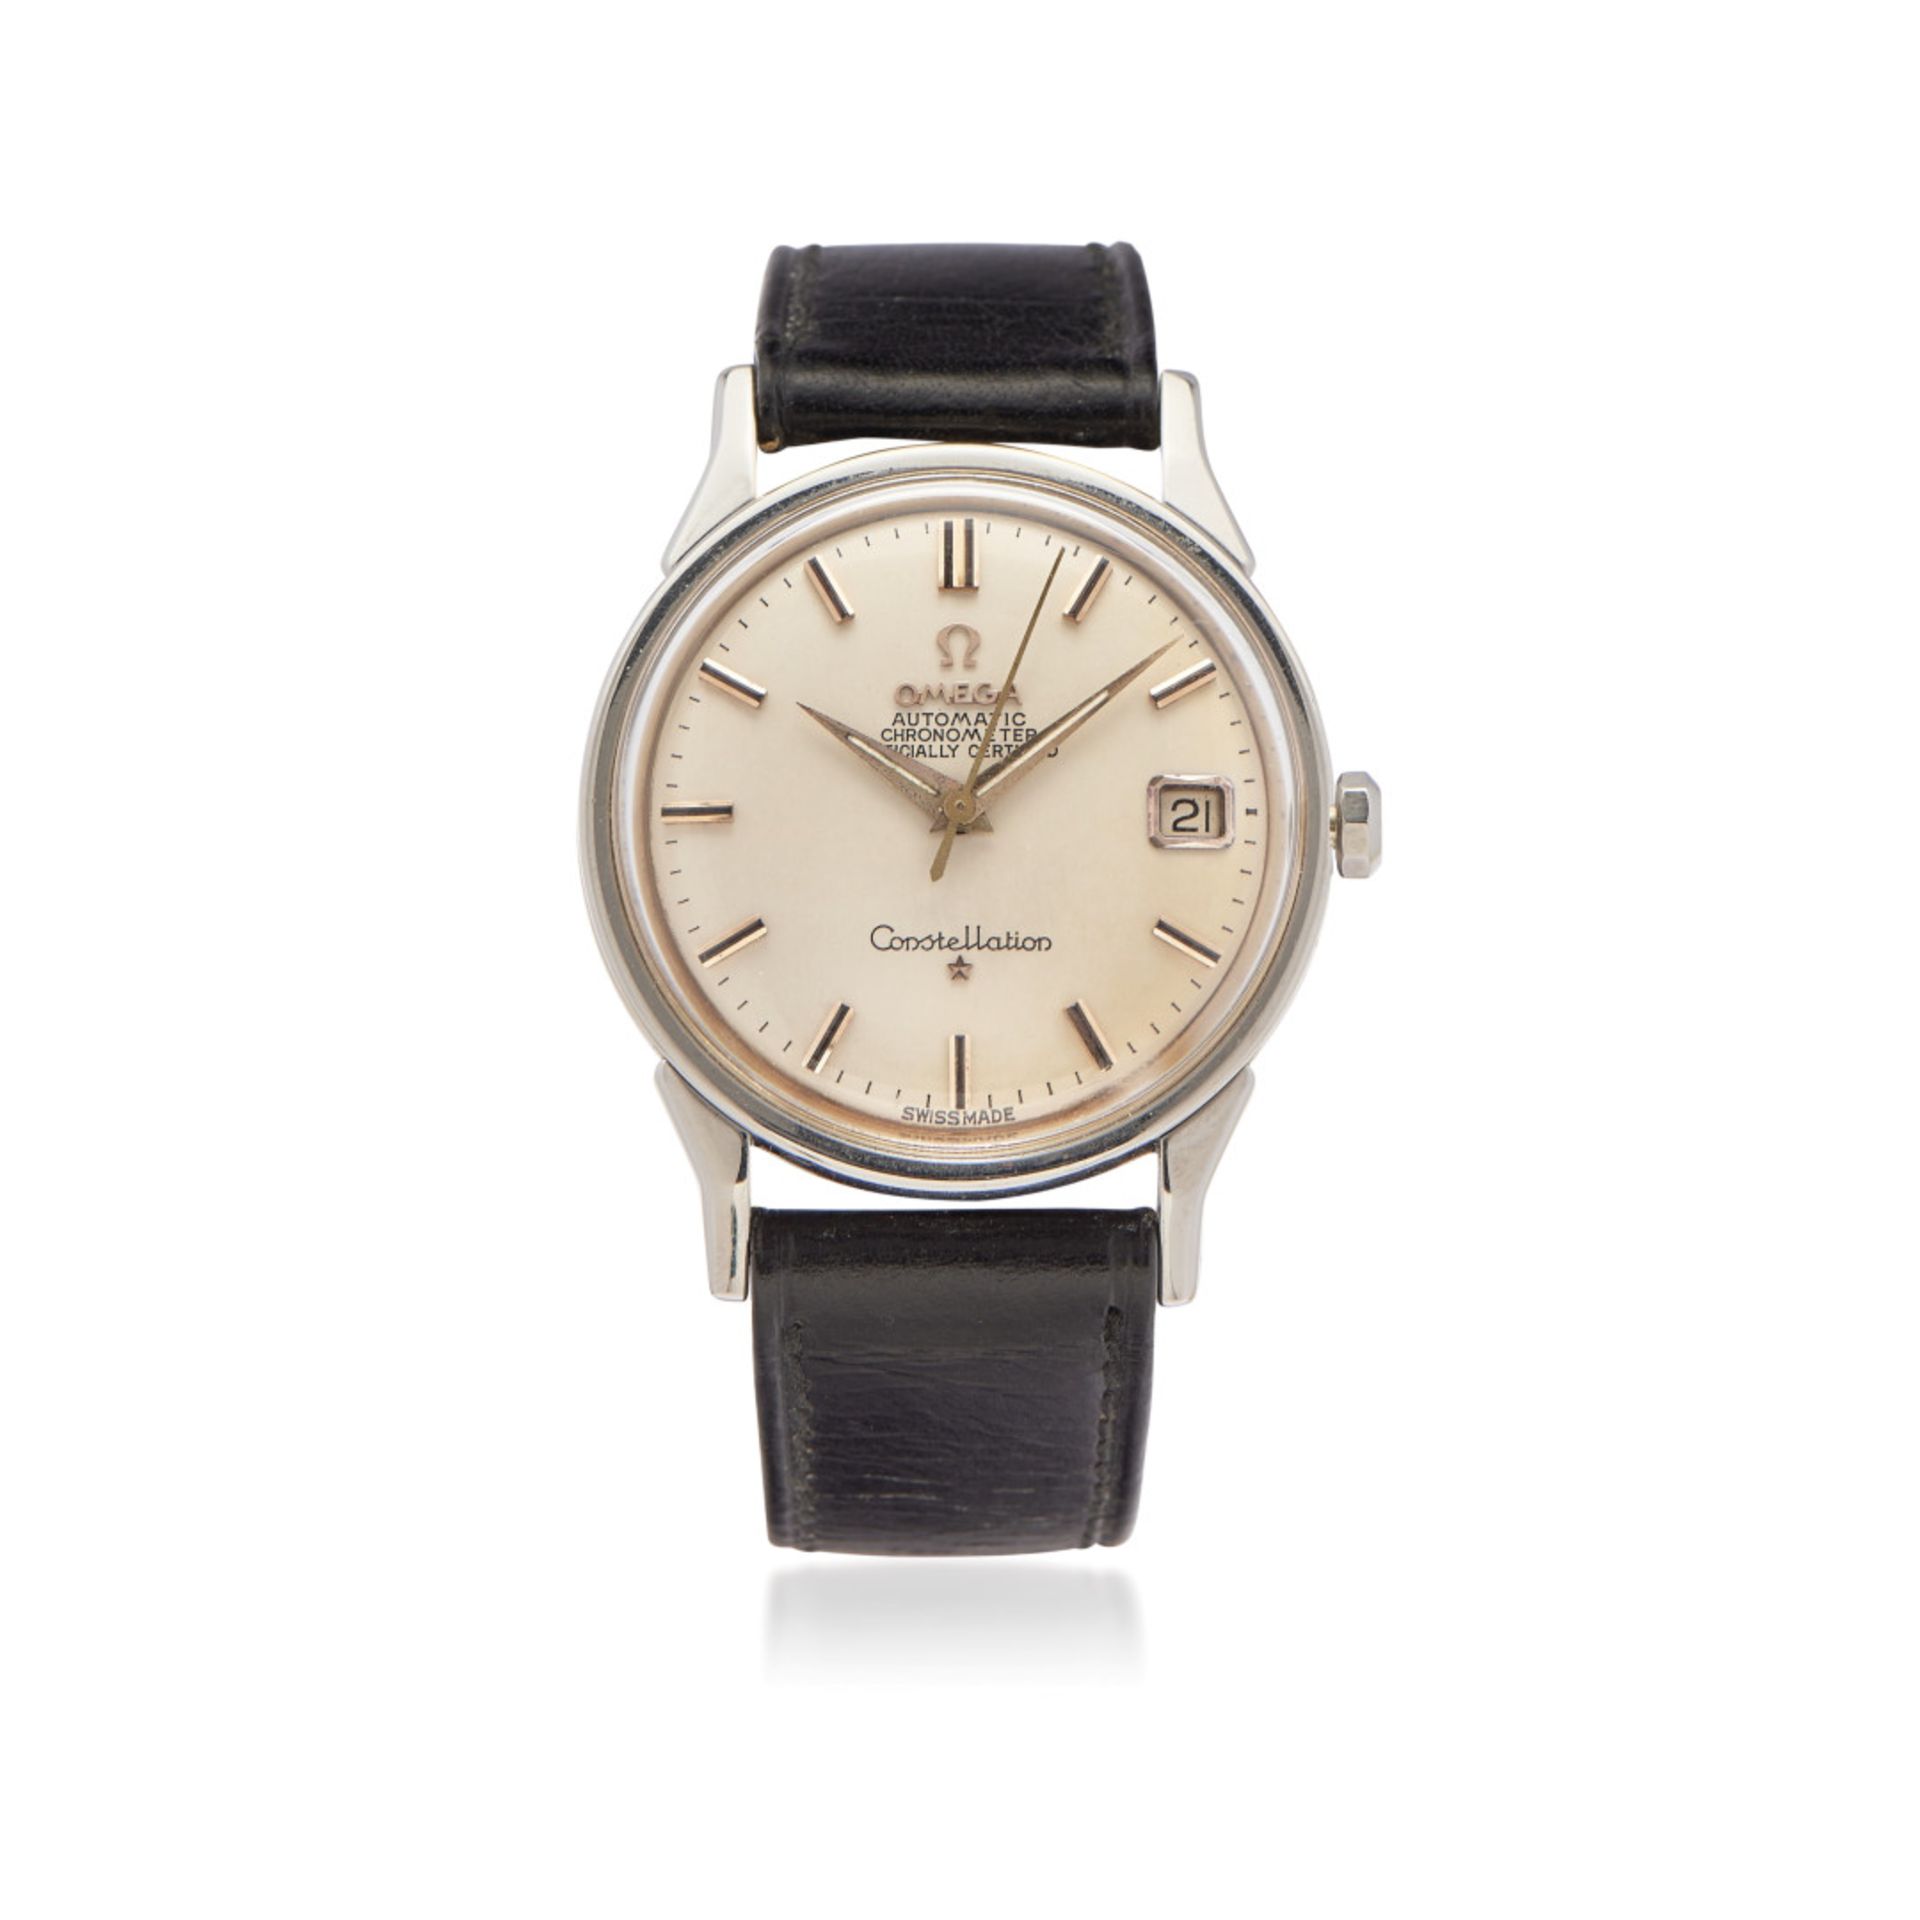 OMEGA CONSTELLATION REF. 14902 AUTOMATIC, 60s - OMEGA CONSTELLATION REF. 14902 AUTOMATIC, 60S